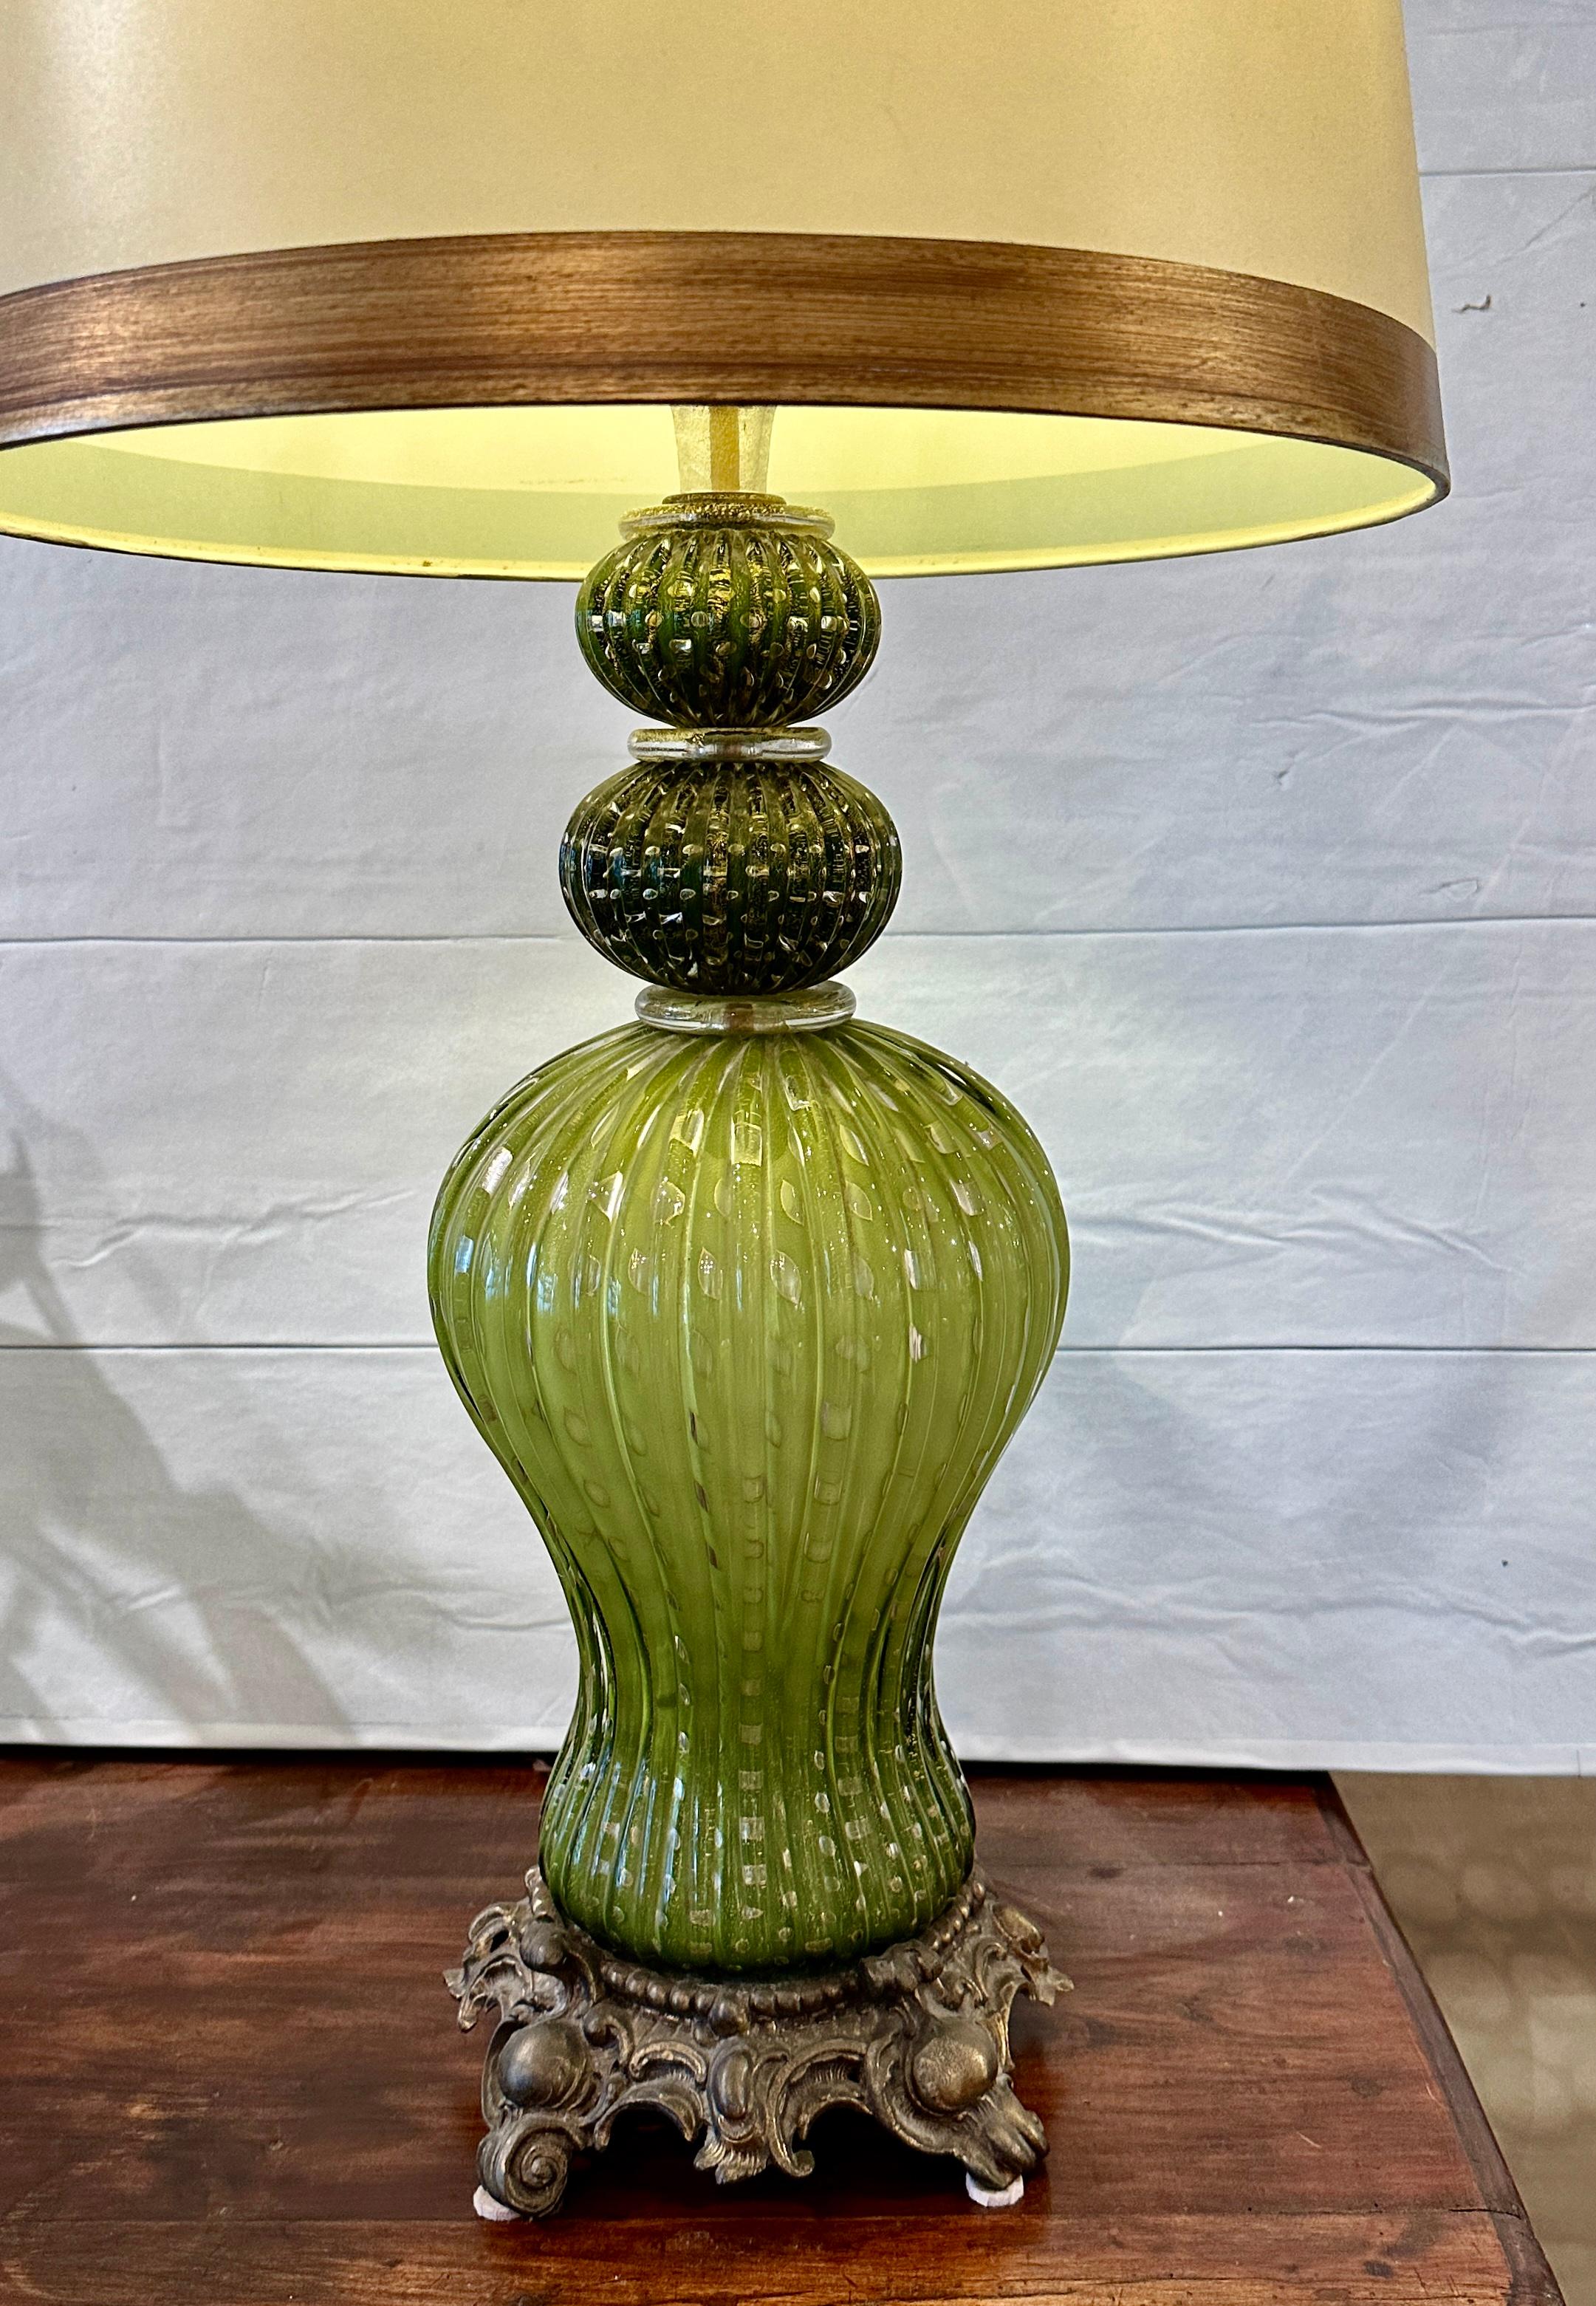 Beautiful large Murano glass table lamp.  Hand made in three sections.
Softly fluted shape in gold infused aventurine glass giving a rich shimmering affect along with Bullicante bubble glass technique.  It is topped with darker green fluted balls. 